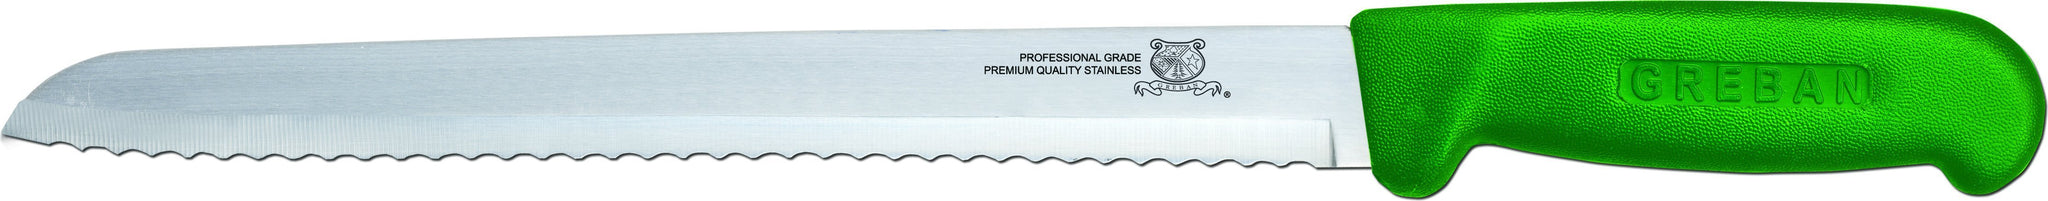 Omcan - 8” Slicer Knife with Narrow R-Wave Blade & Green Handle, 10/cs - 12617